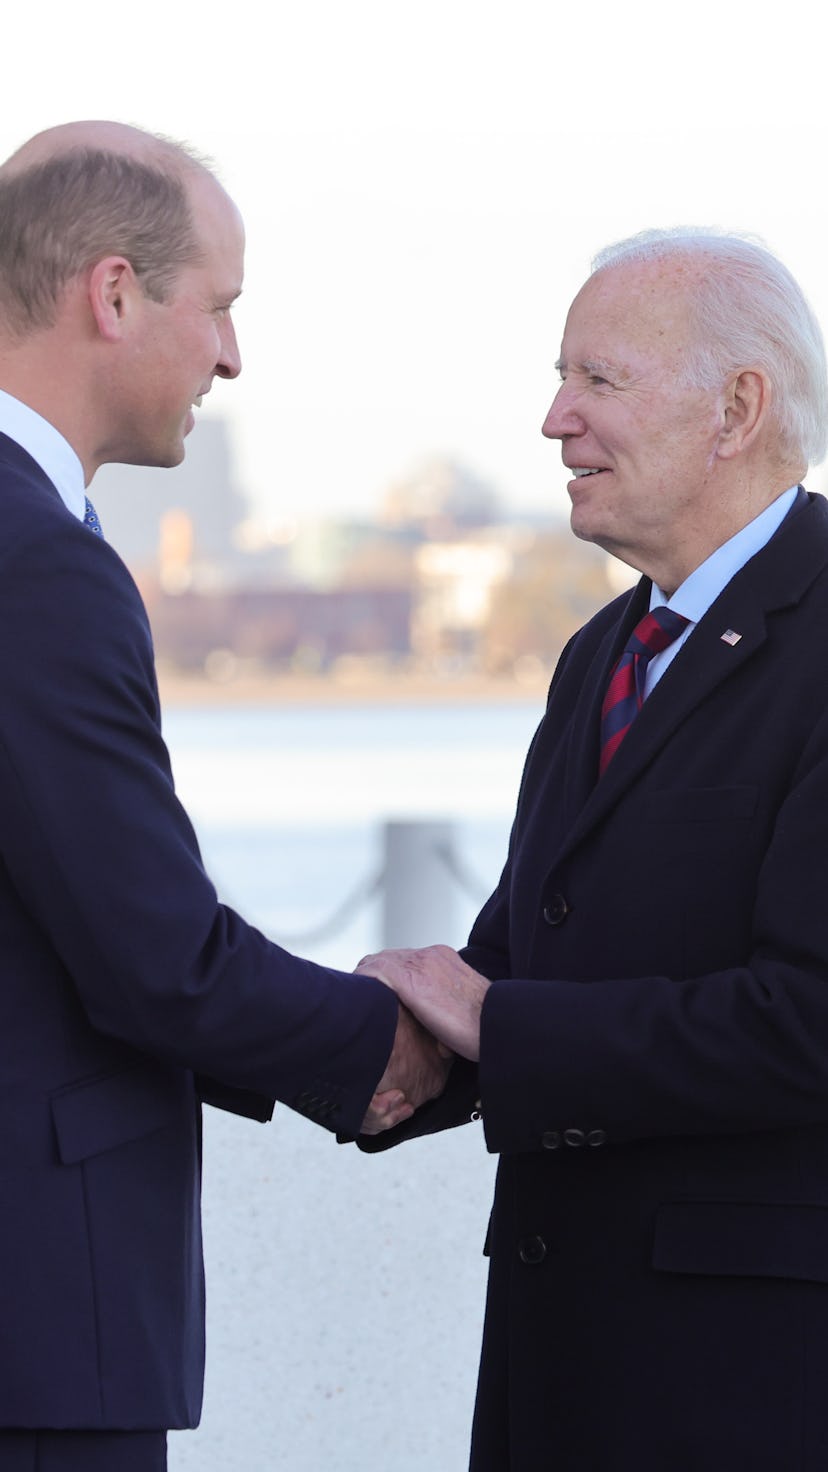 Prince William and Joe Biden met at the John F. Kennedy Presidential Library and Museum on Dec. 2, 2...